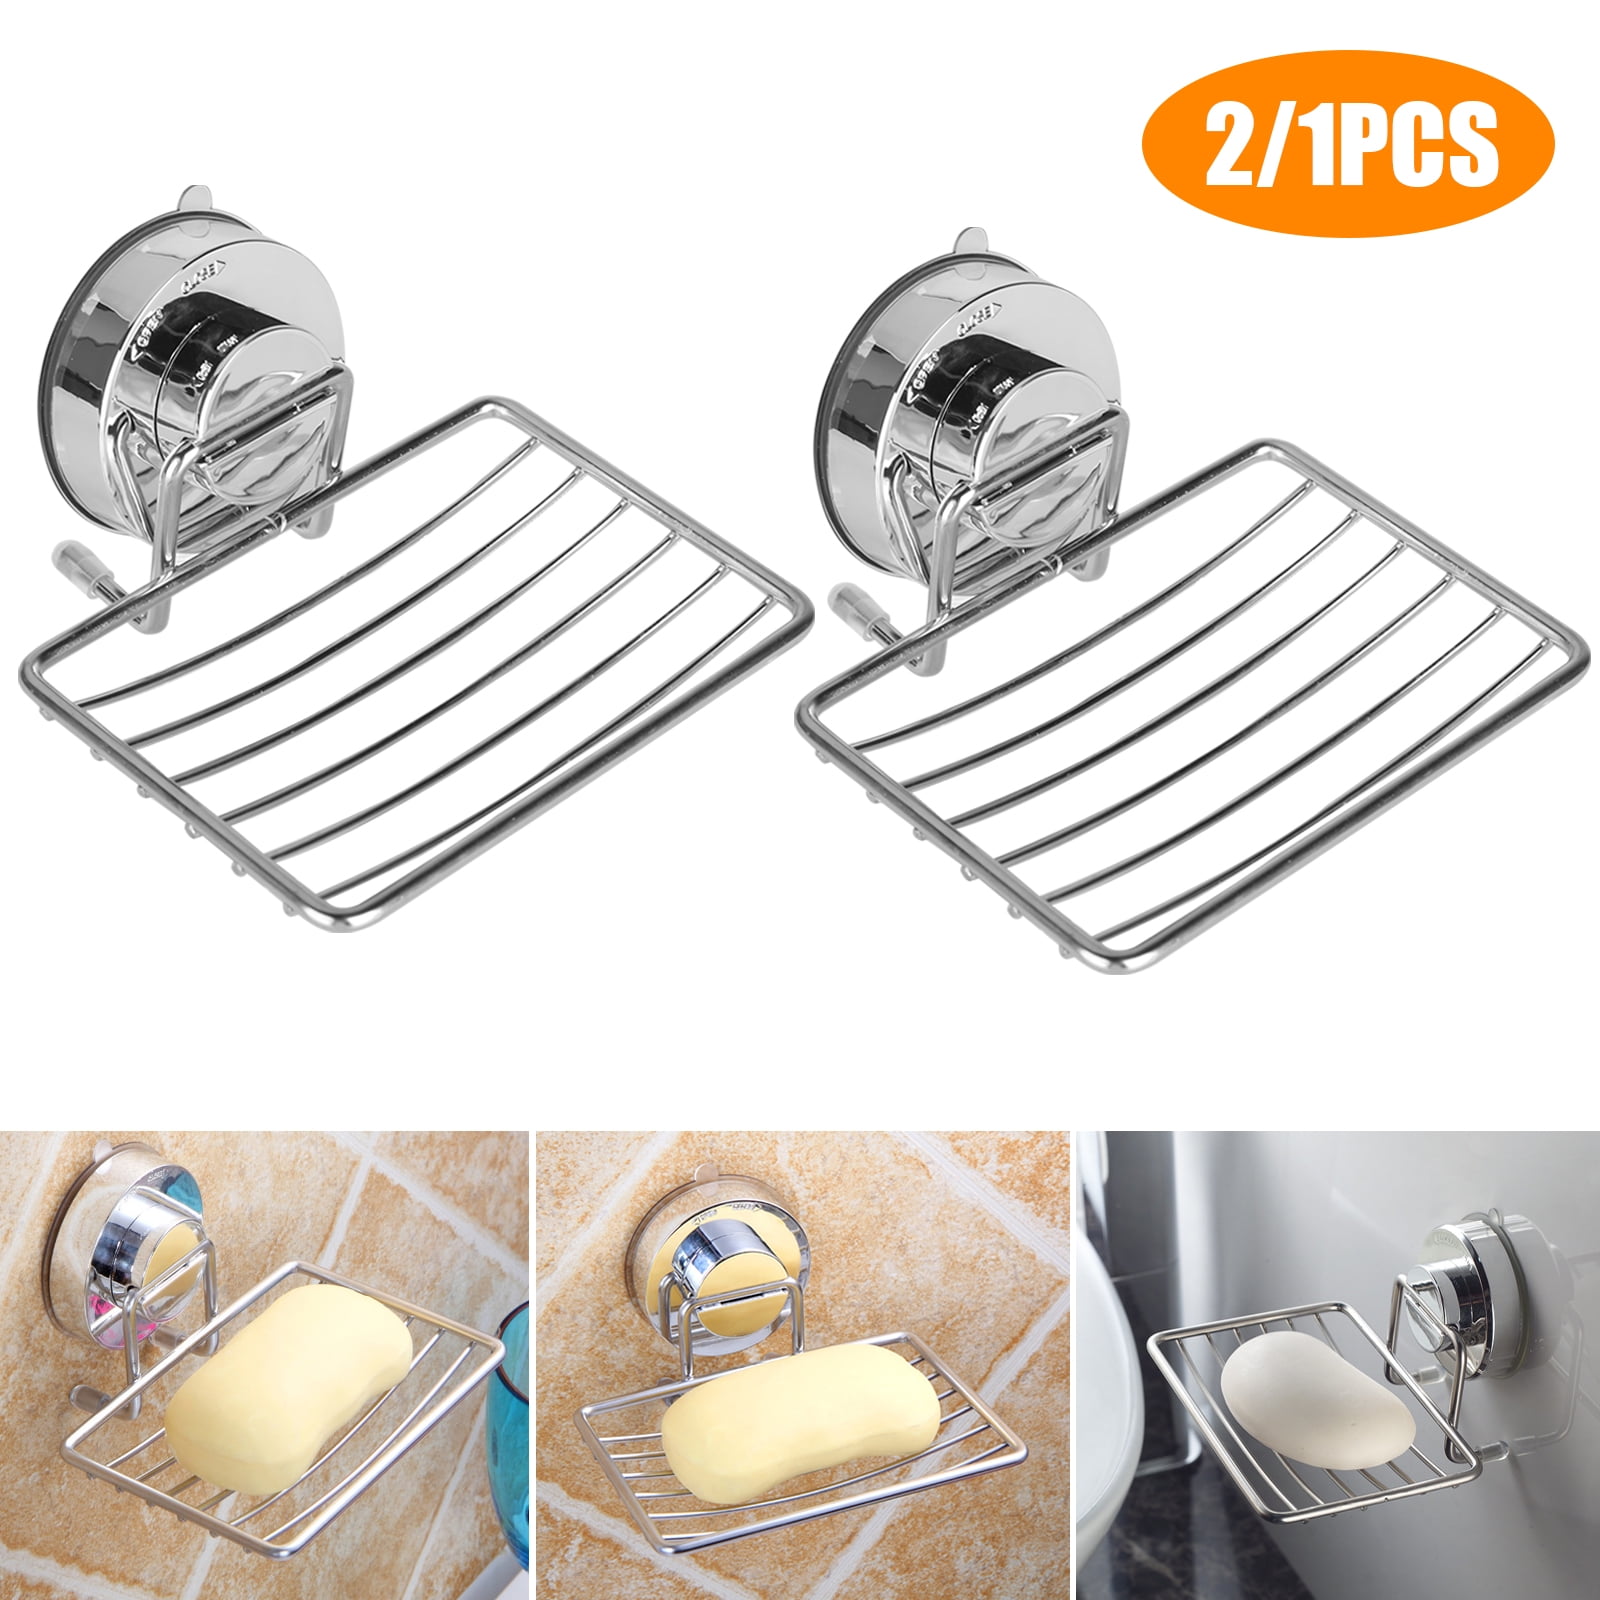 Rebrilliant Soap Dish,Stainless Steel No Drilling Powerful Sponge Holder  Tray With Powerful Wall Mounted For Shower, Bathroom, Kitchen